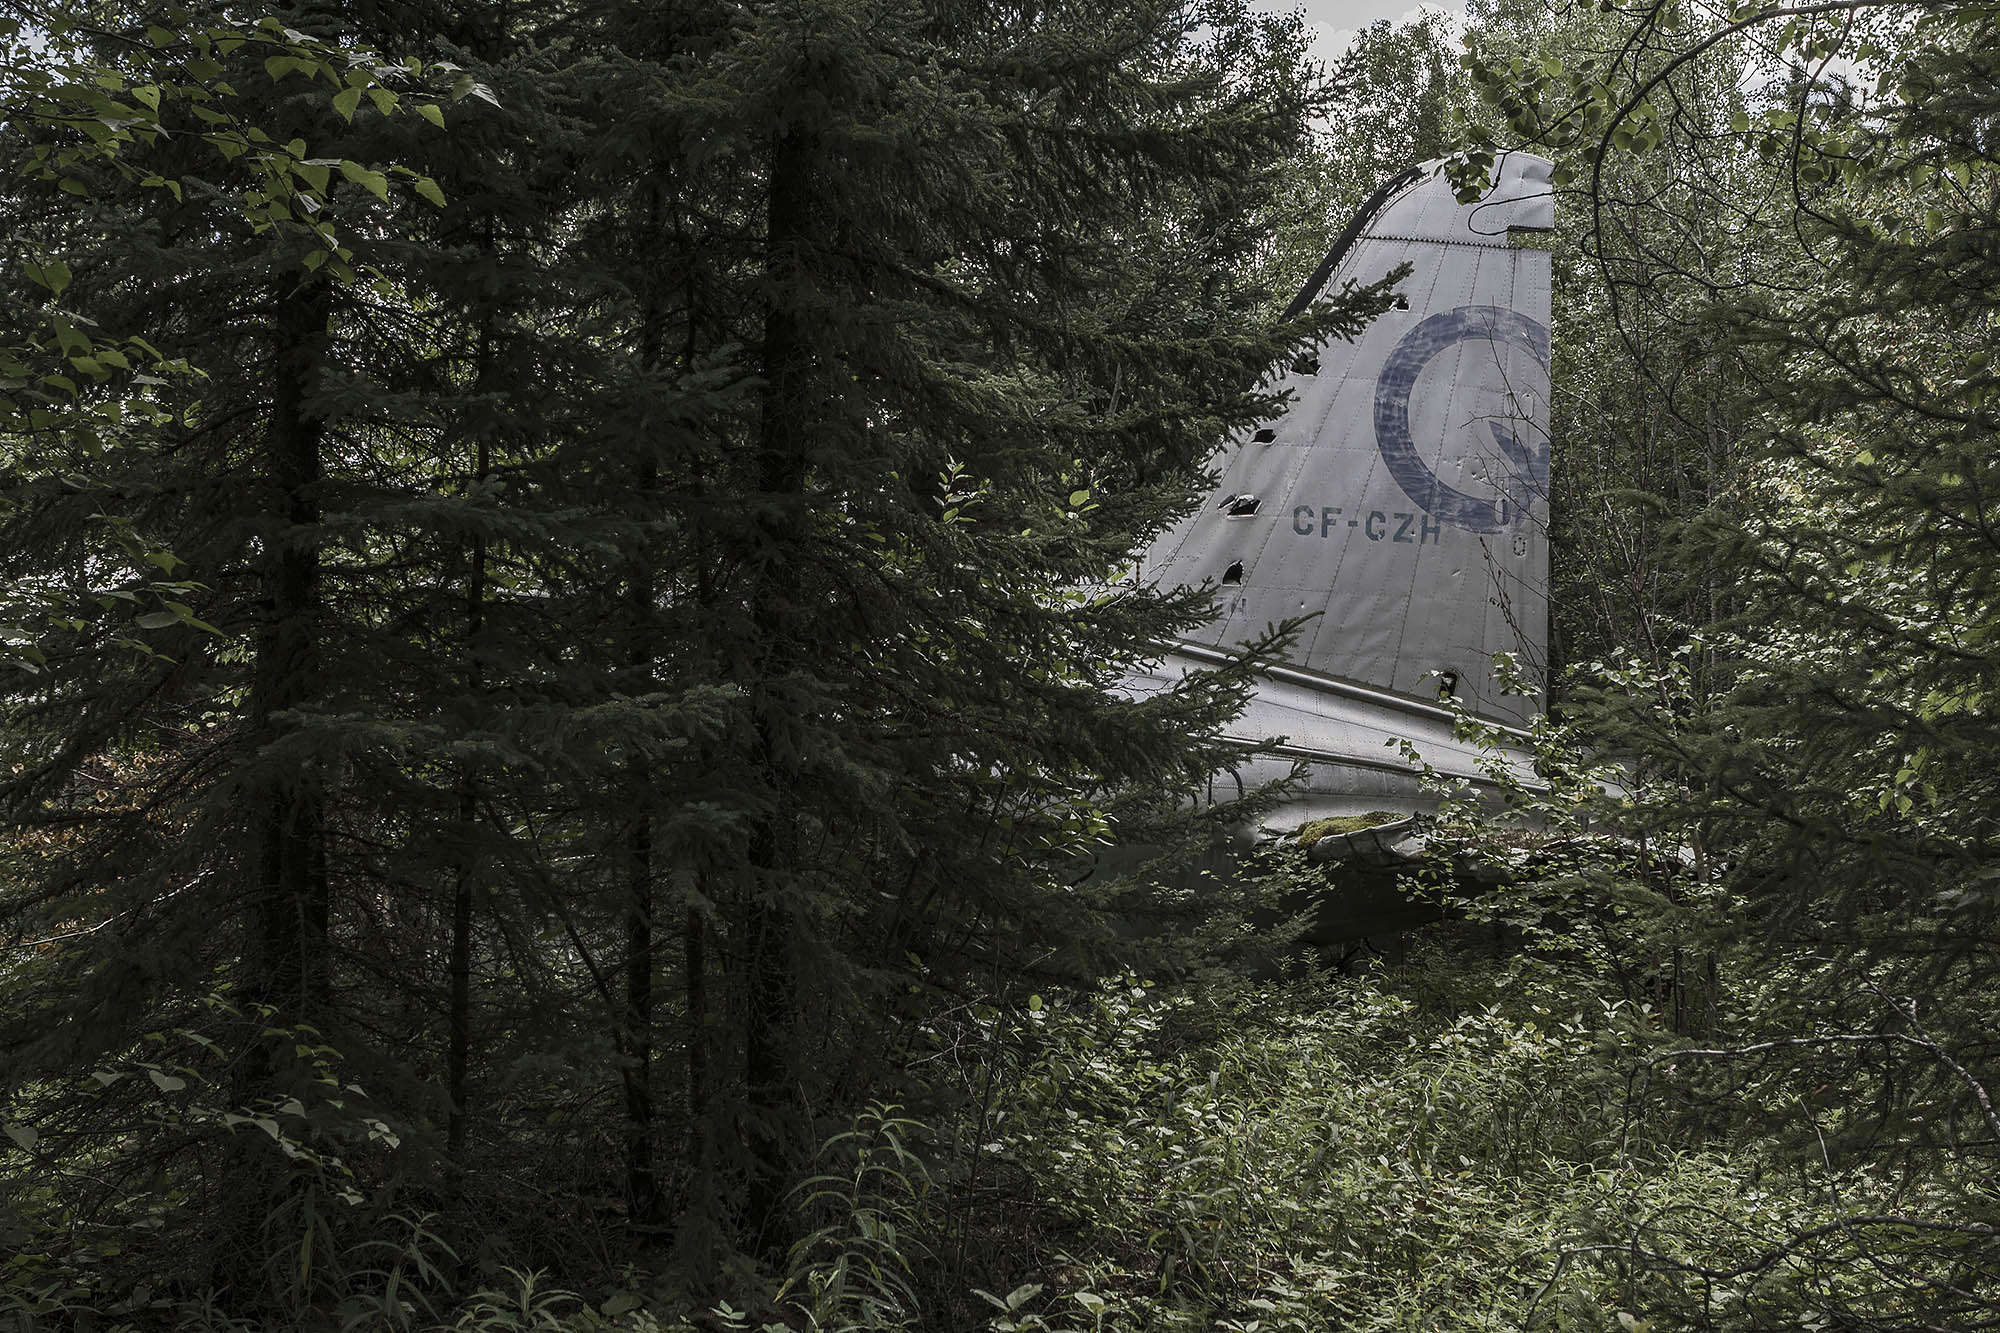 Slide 19 of 28: The wrecks may be gloomy to others but Eckell finds them beautiful. He feels that despite the tough weather conditions and natural wear and tear, the abandoned planes are still a solid piece of work.